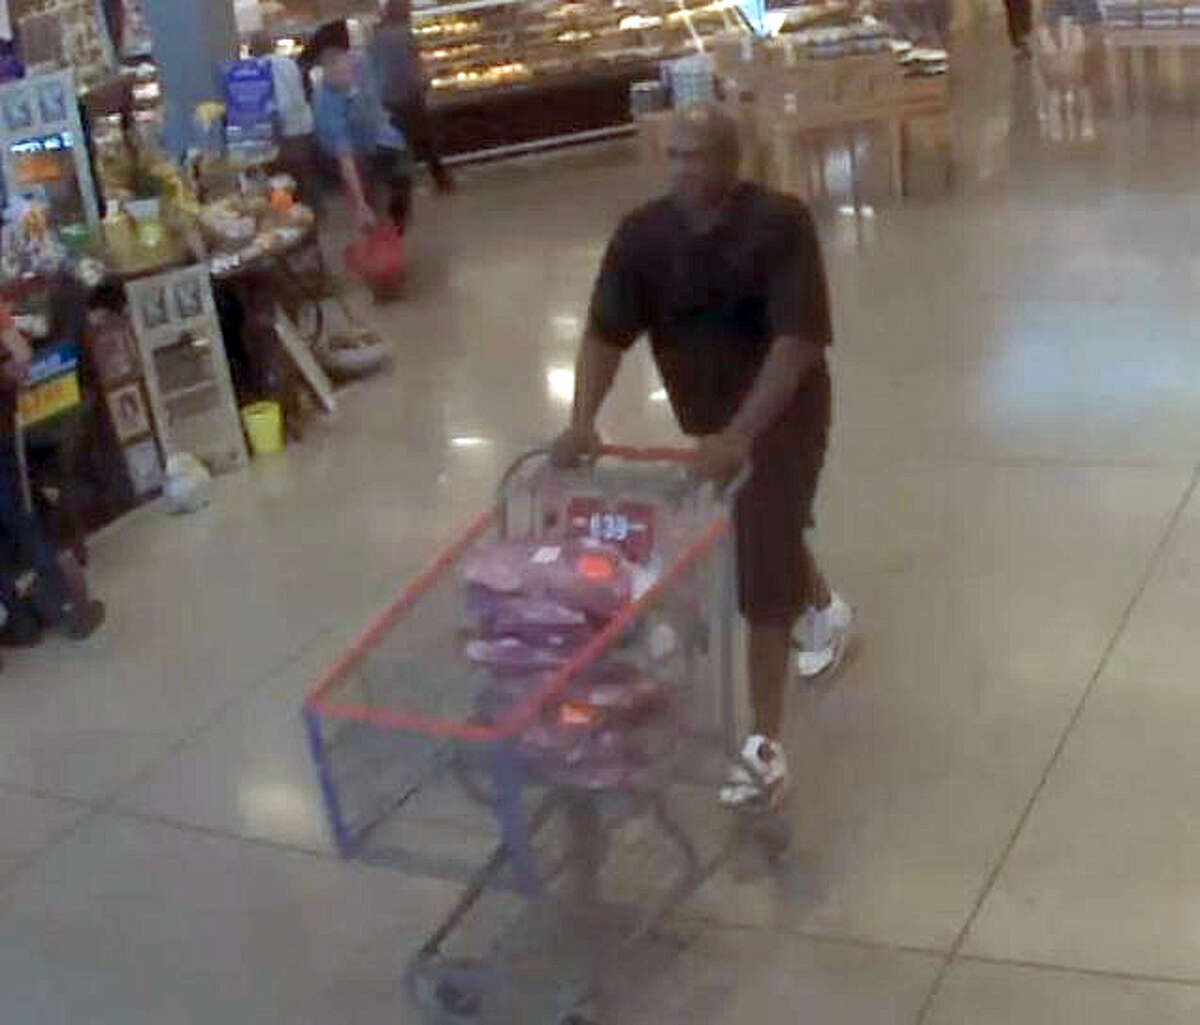 Police believe footage shows James Cordell Avery pushing a cart full of meat through a grocery store.